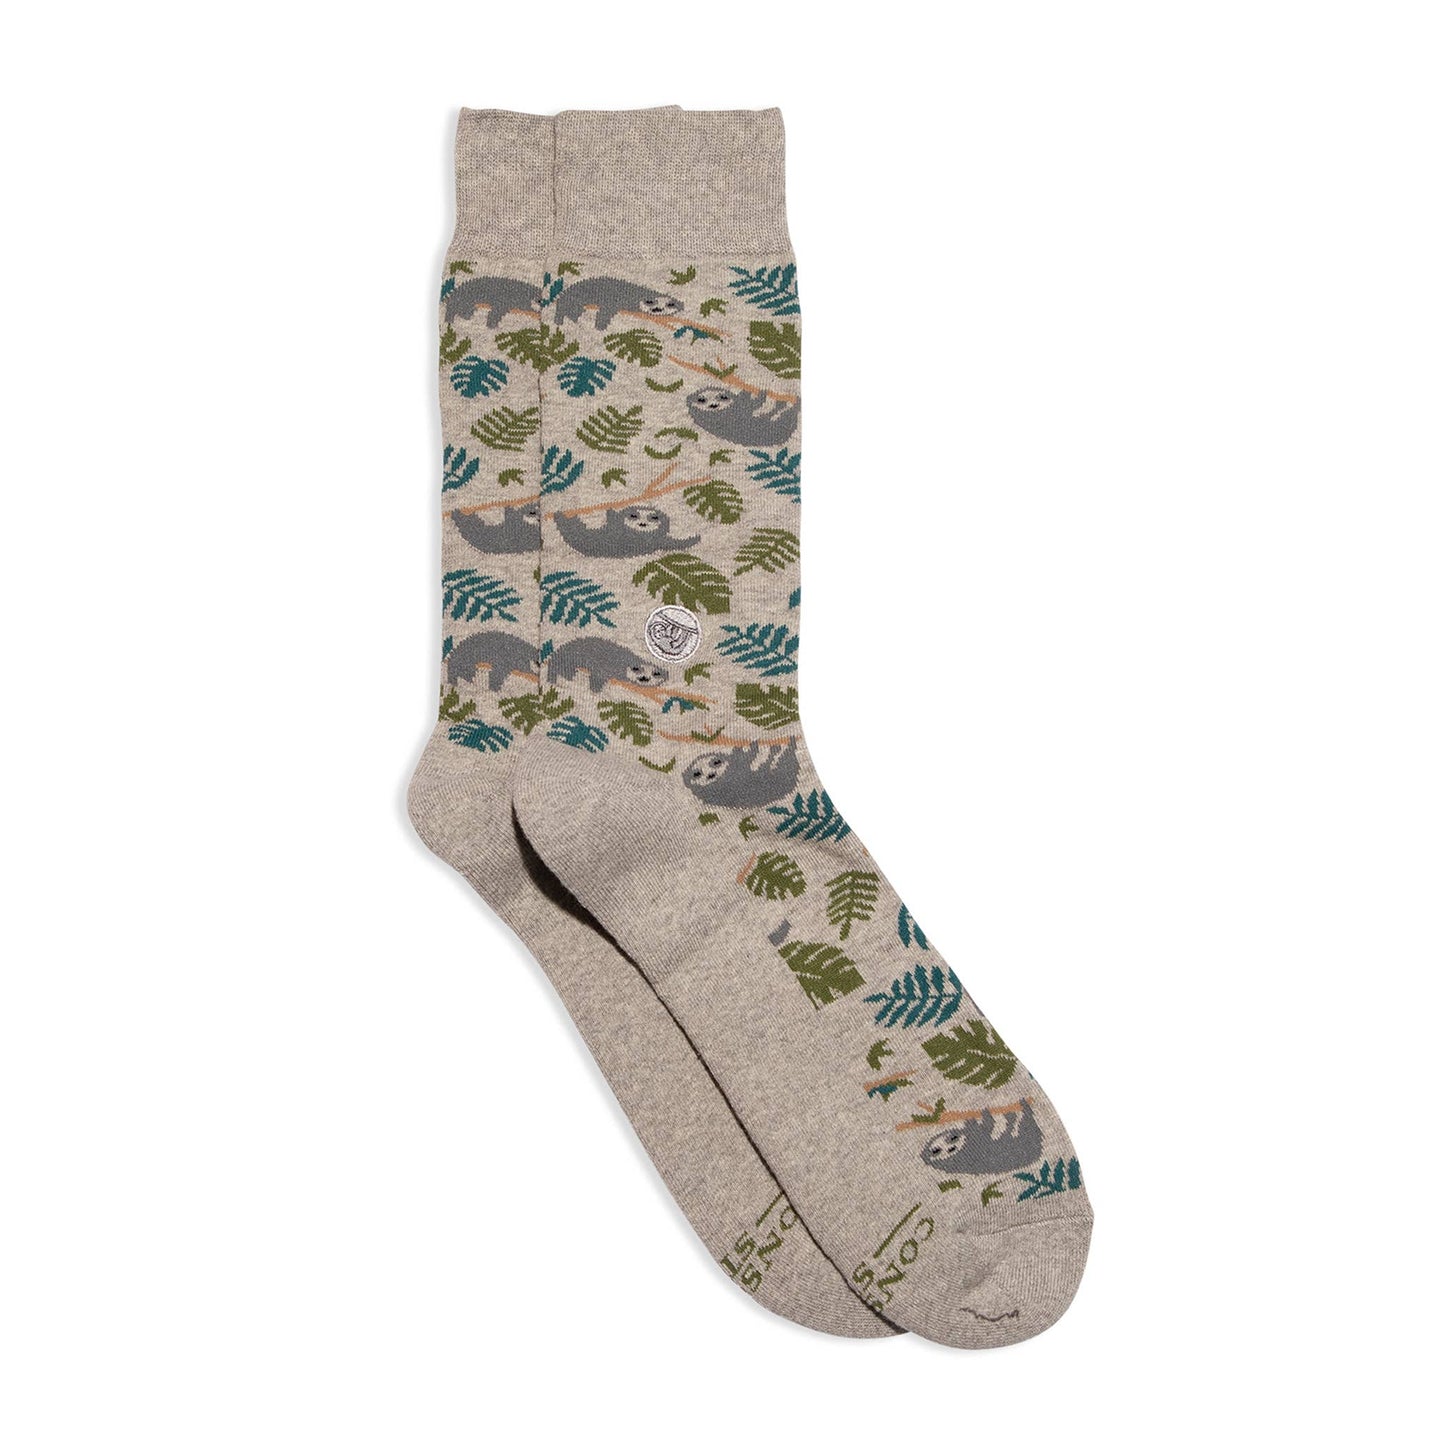 Conscious Step - Socks that Protect Sloths